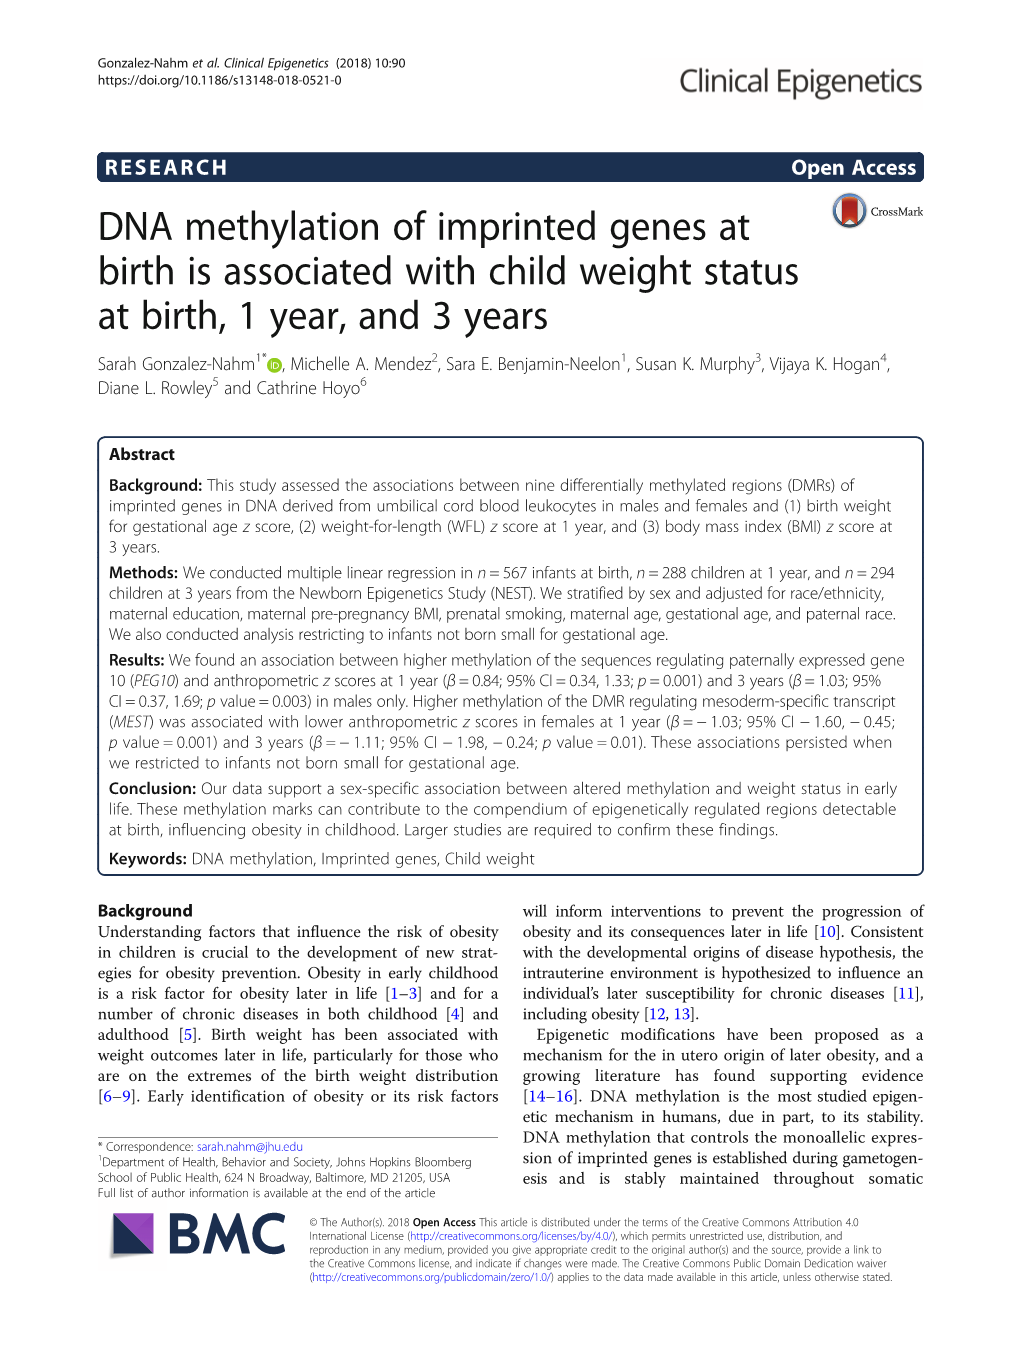 DNA Methylation of Imprinted Genes at Birth Is Associated with Child Weight Status at Birth, 1 Year, and 3 Years Sarah Gonzalez-Nahm1* , Michelle A